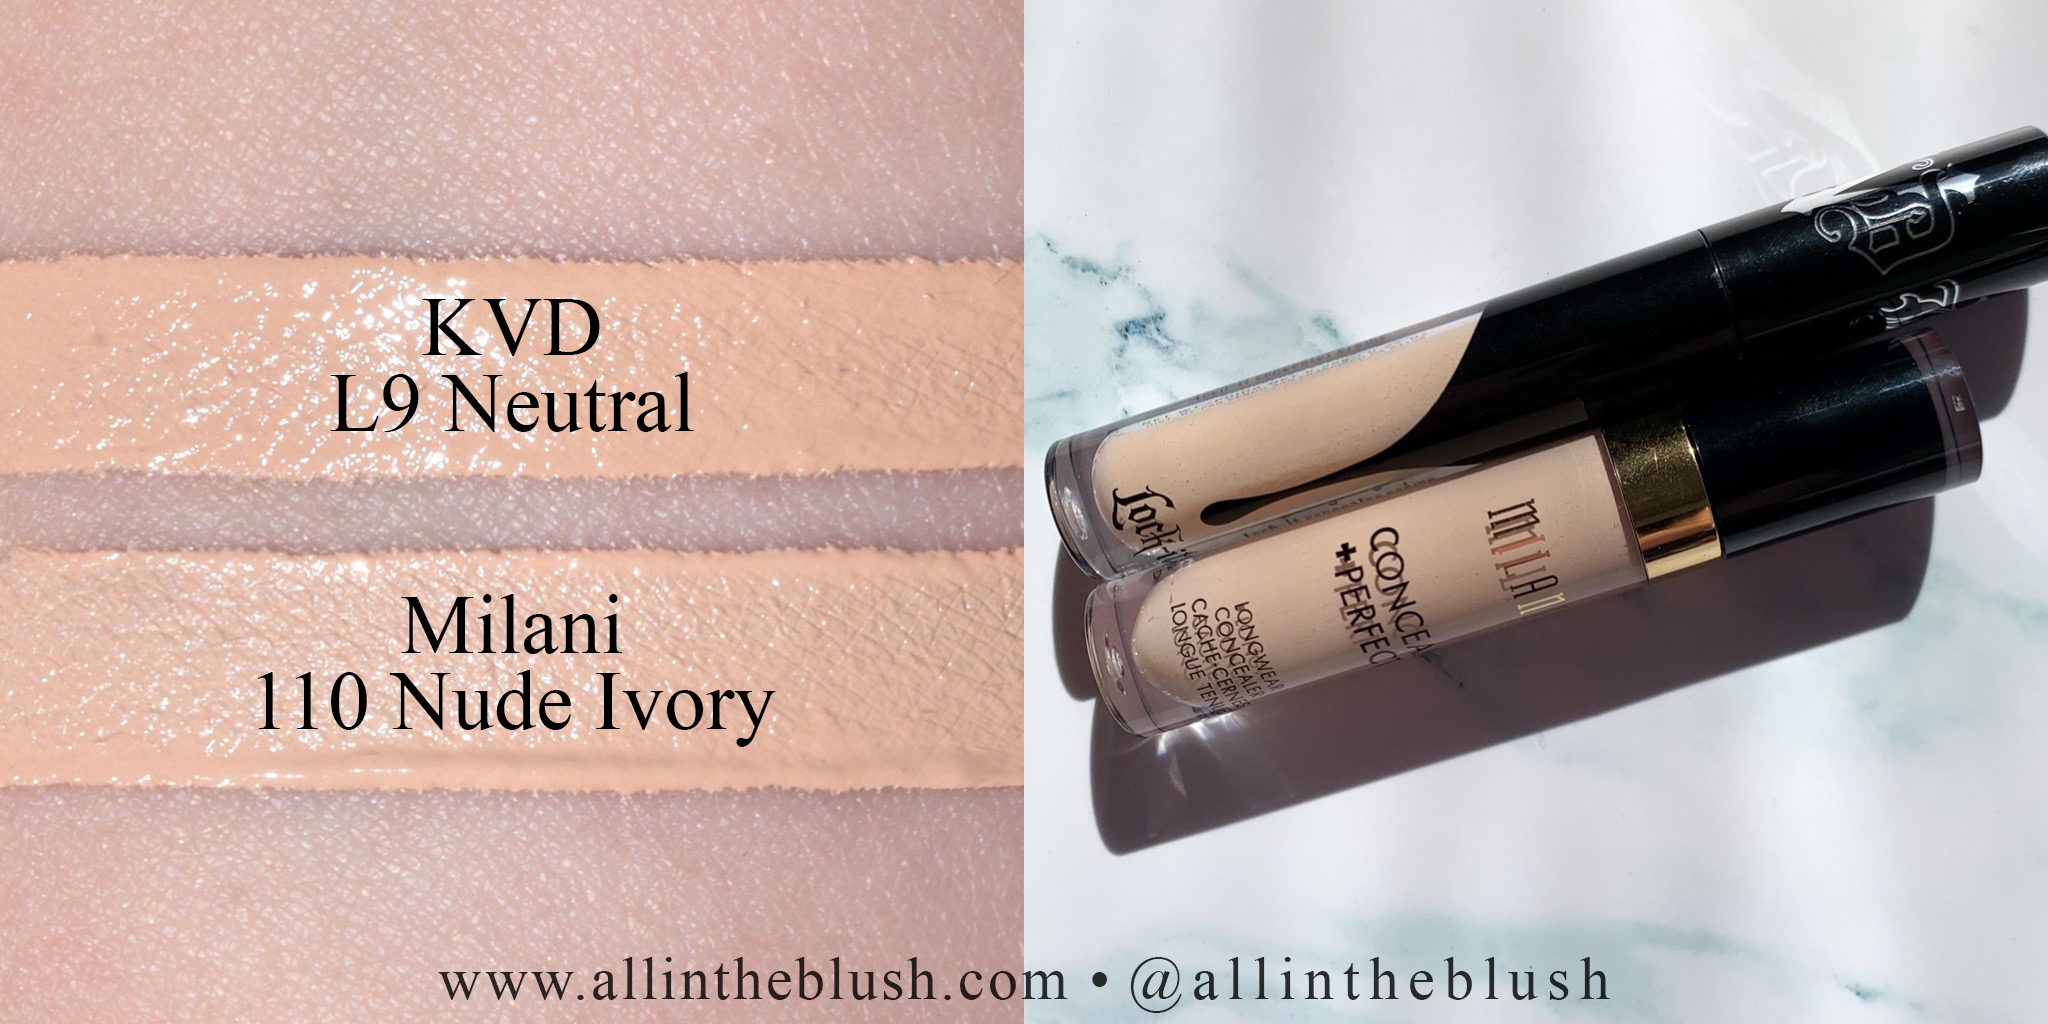 Swatch - Milani Conceal + Perfect Longwear Concealer 110 Nude Ivory and KVD Lock-It Concealer Crème L1 Neutral